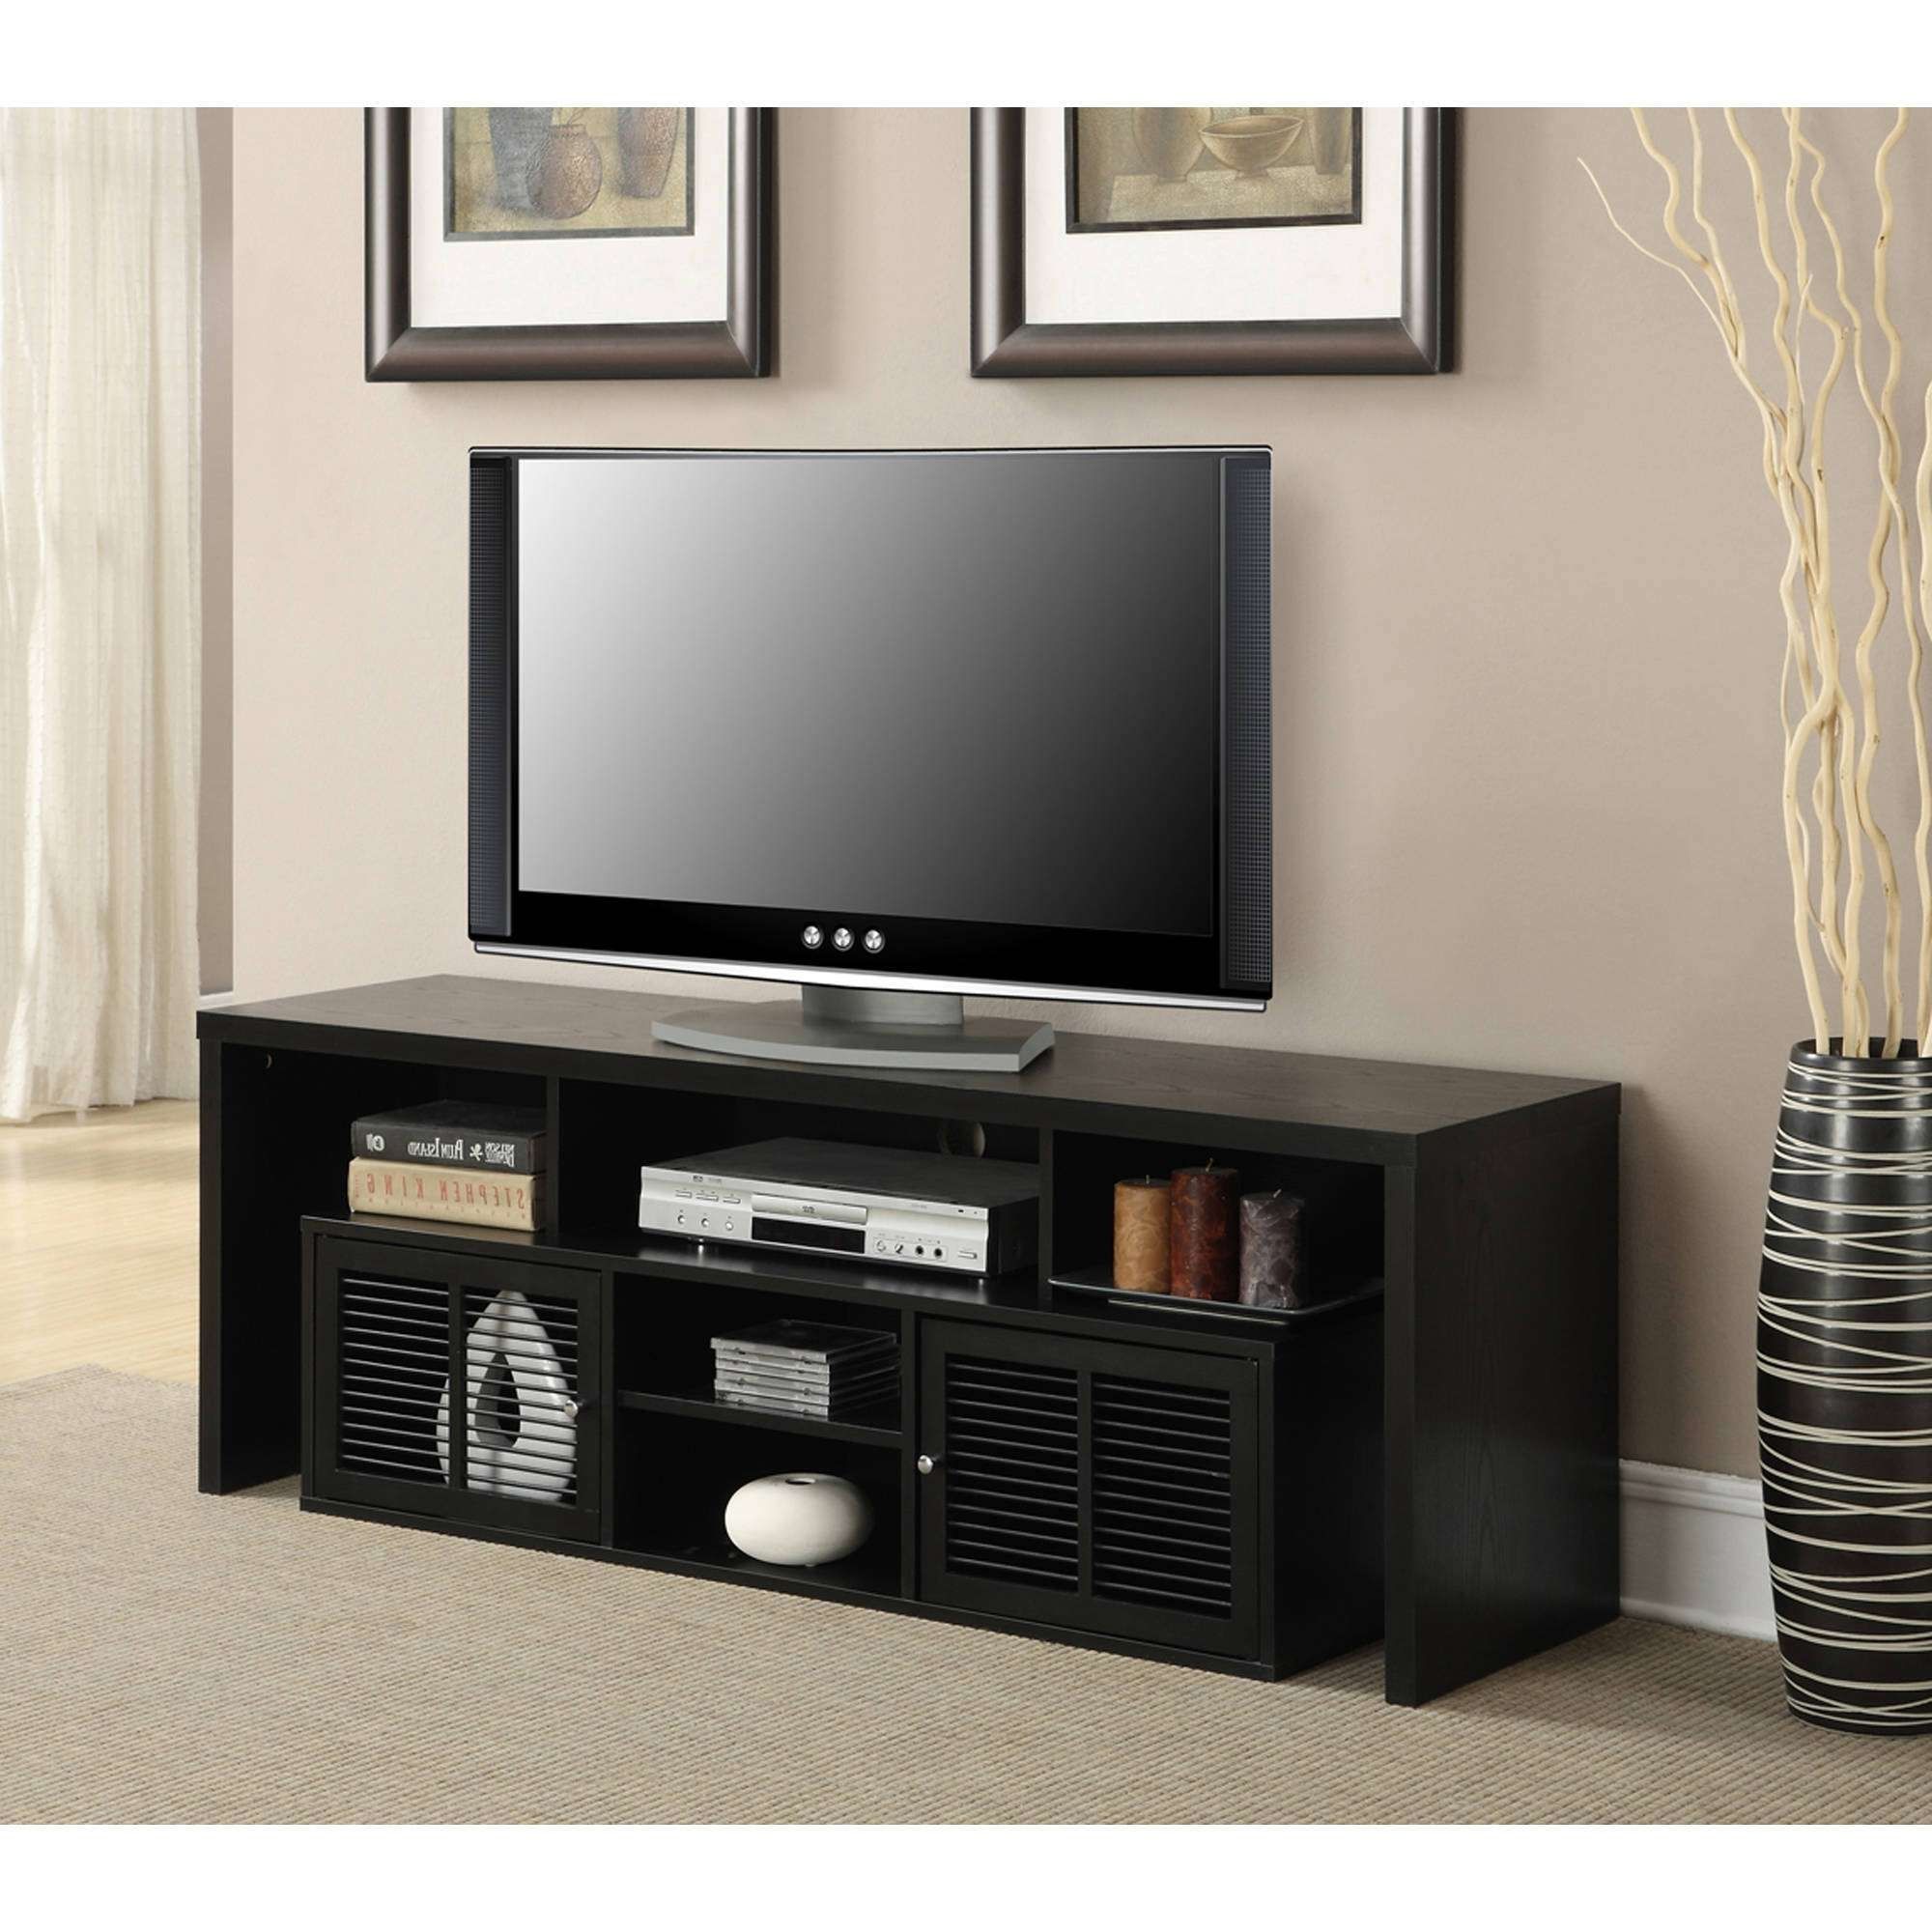 Wood Tv Stand With Mount Corner Inch Flat Screen Lcd Cabinet With Wooden Tv Stands For 55 Inch Flat Screen (View 13 of 15)